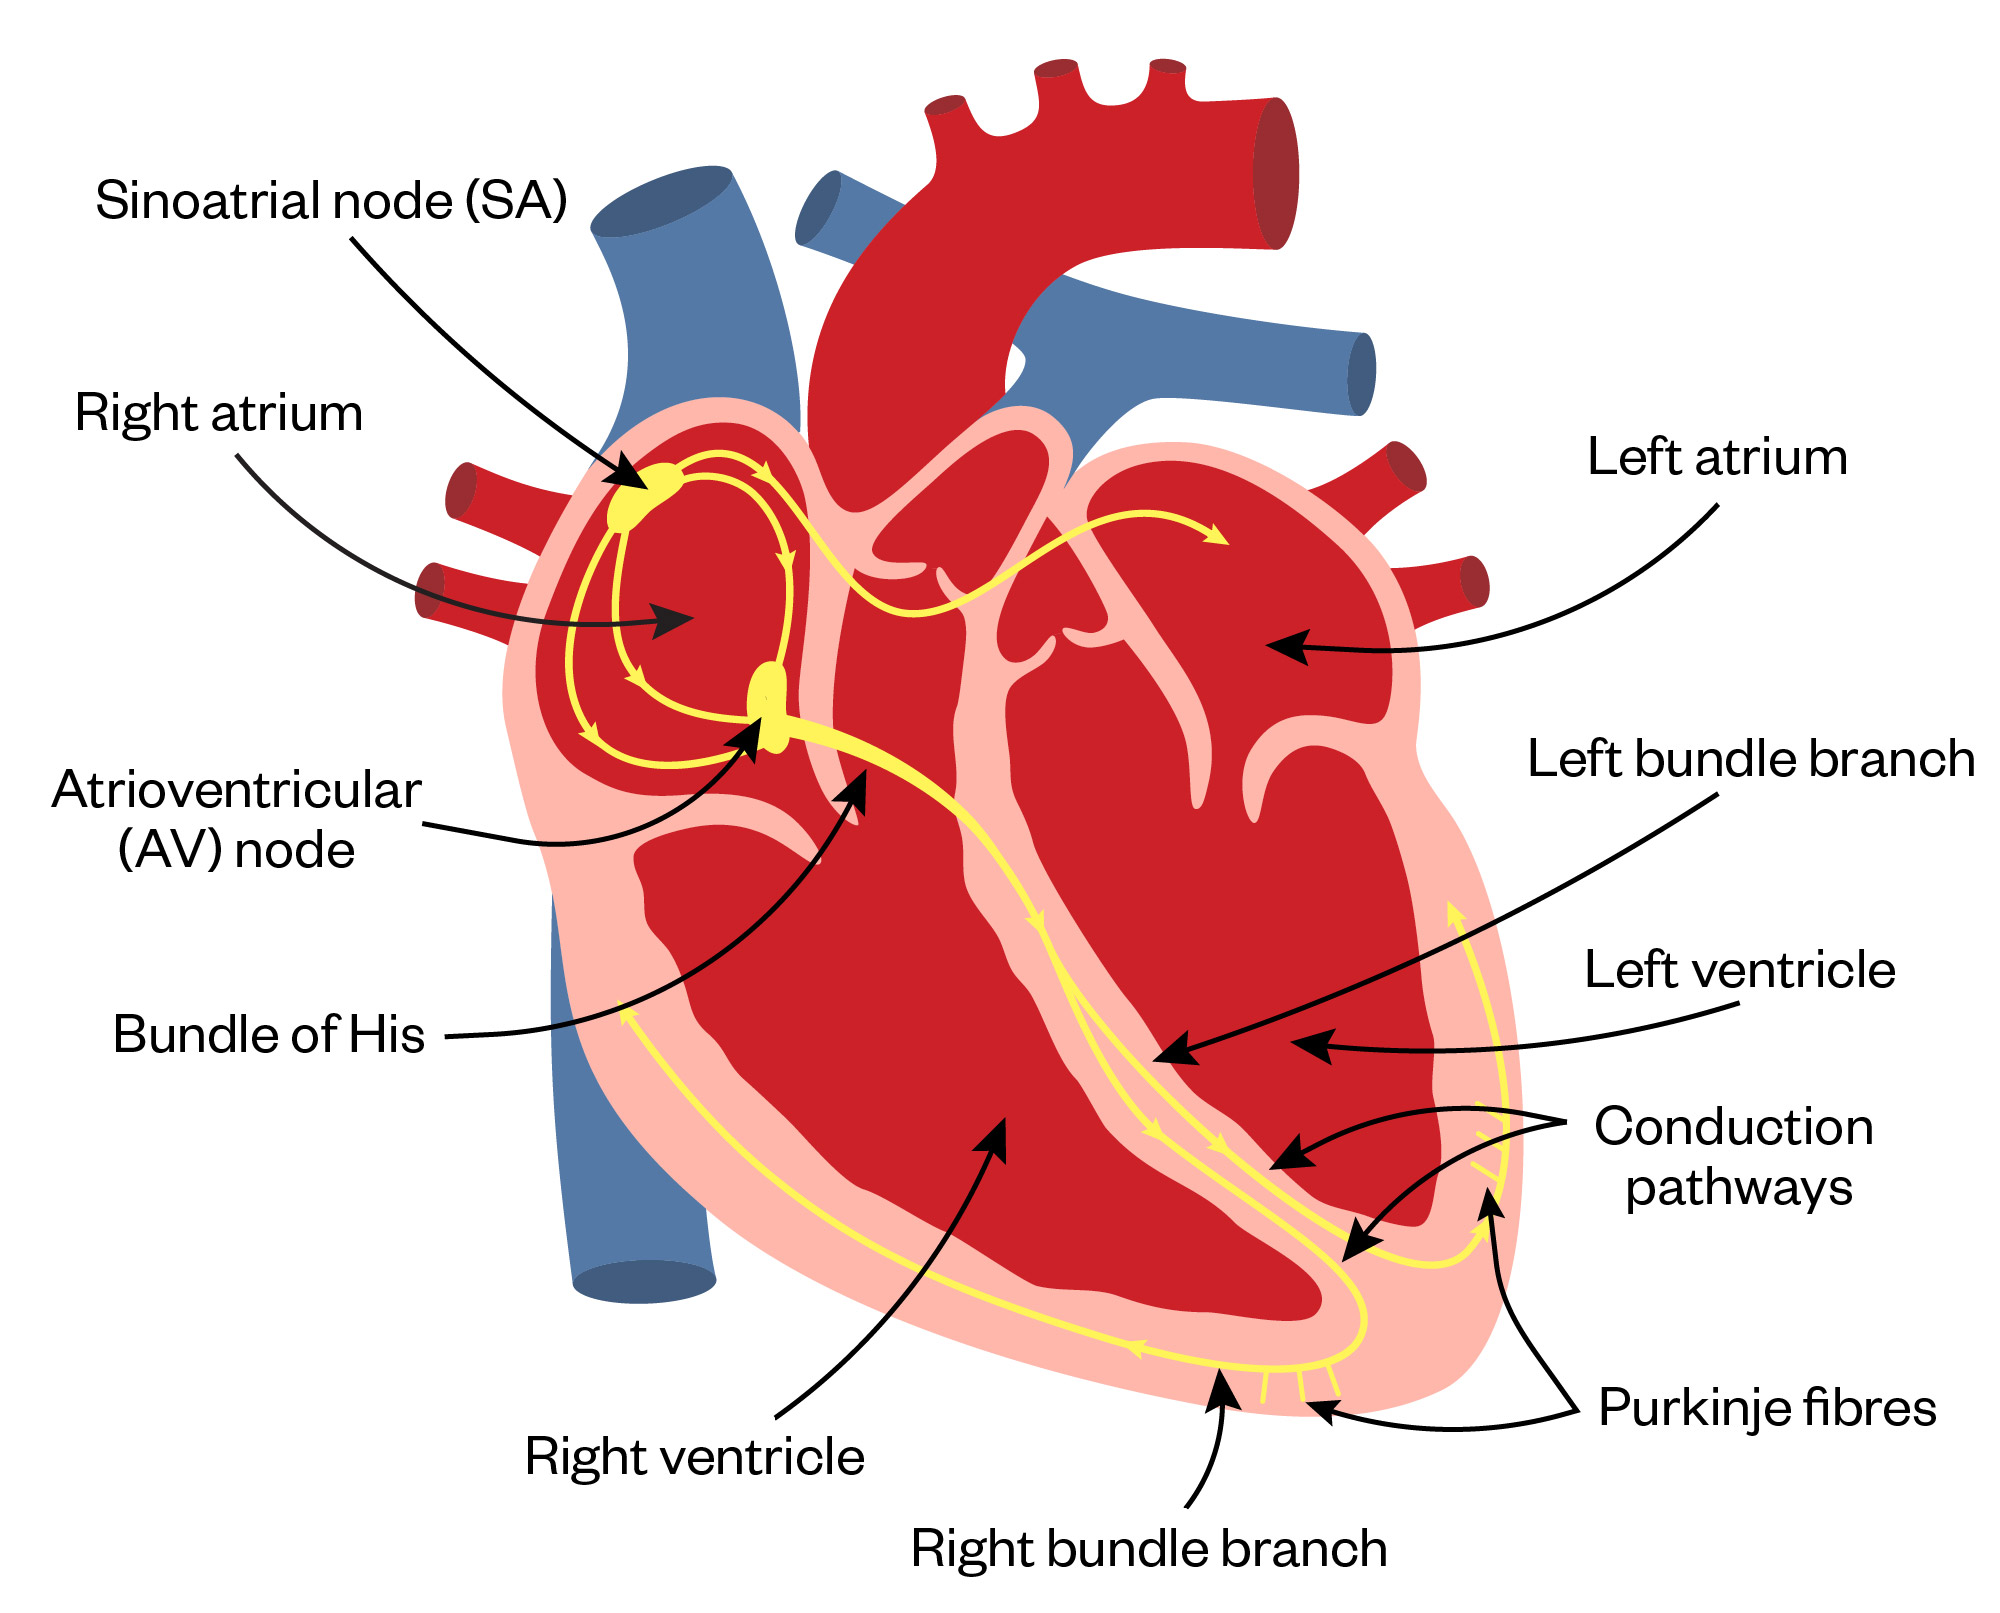 Diagram showing different components of the cardiac electrical system